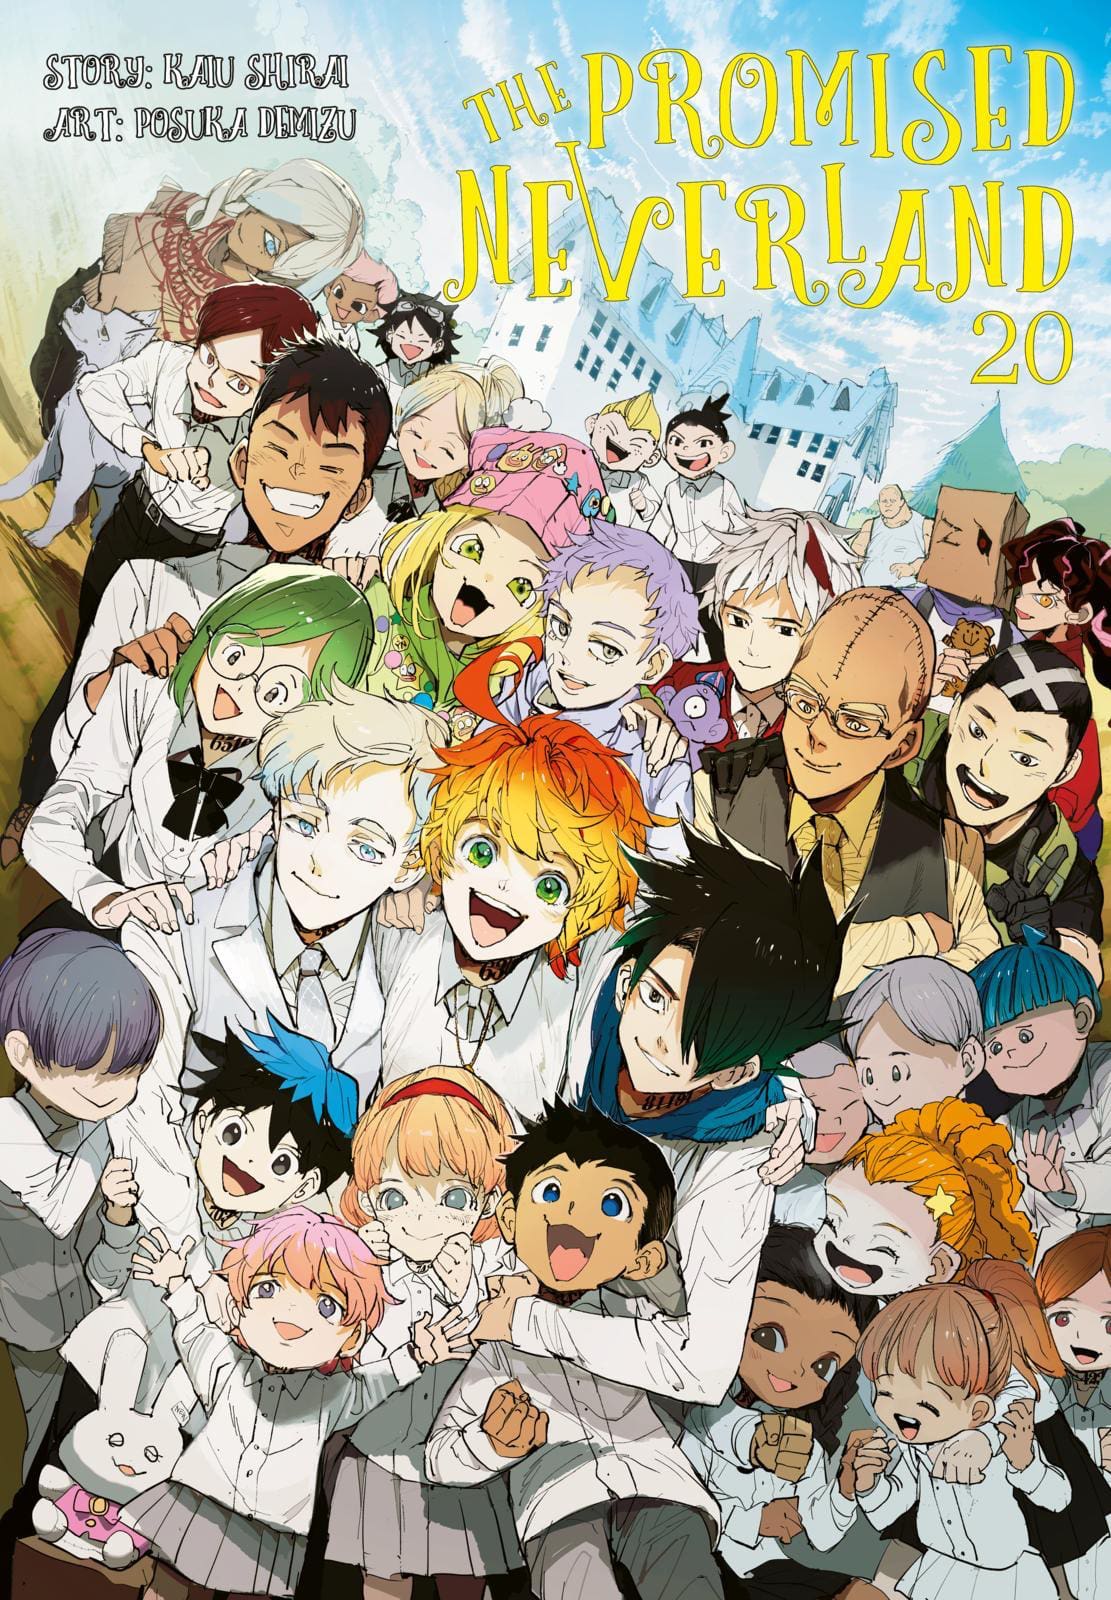 MANGA-REVIEW: THE PROMISED NEVERLAND, BD. 20 (ABSCHLUSSBAND)